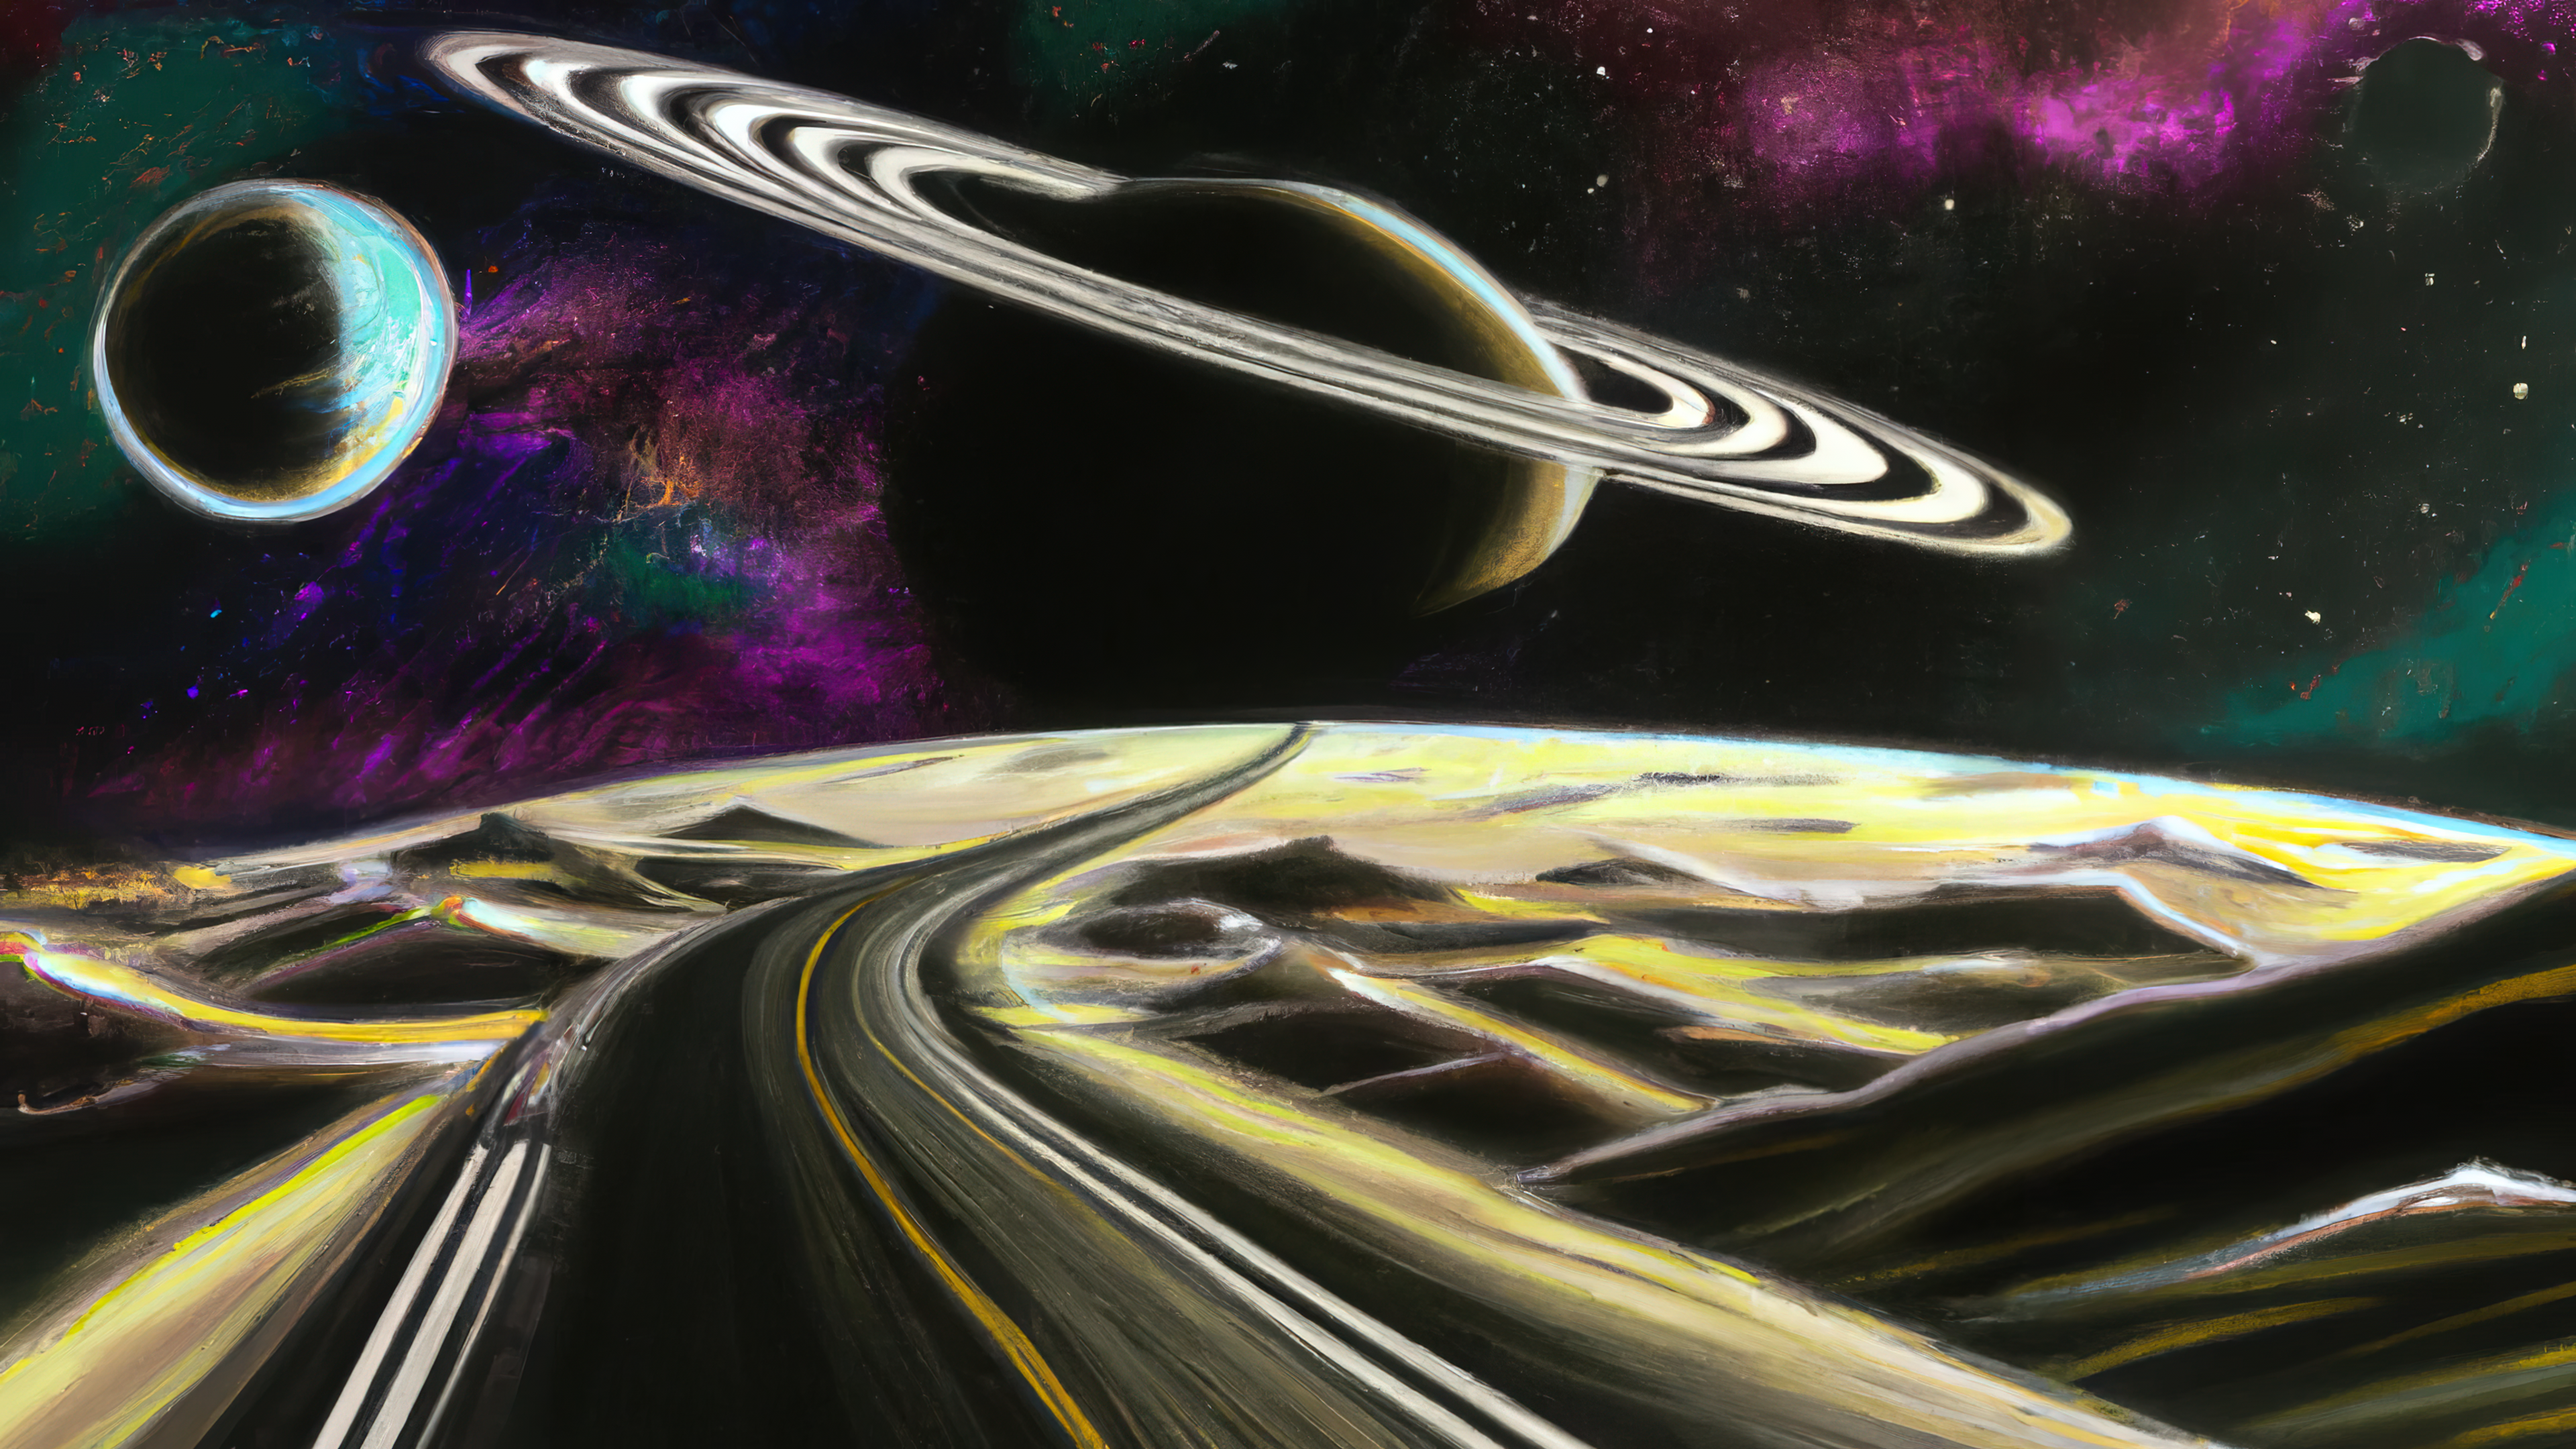 General 3840x2160 AI art painting landscape surreal space Saturn Rings Of Saturn alien world planet space art road stars